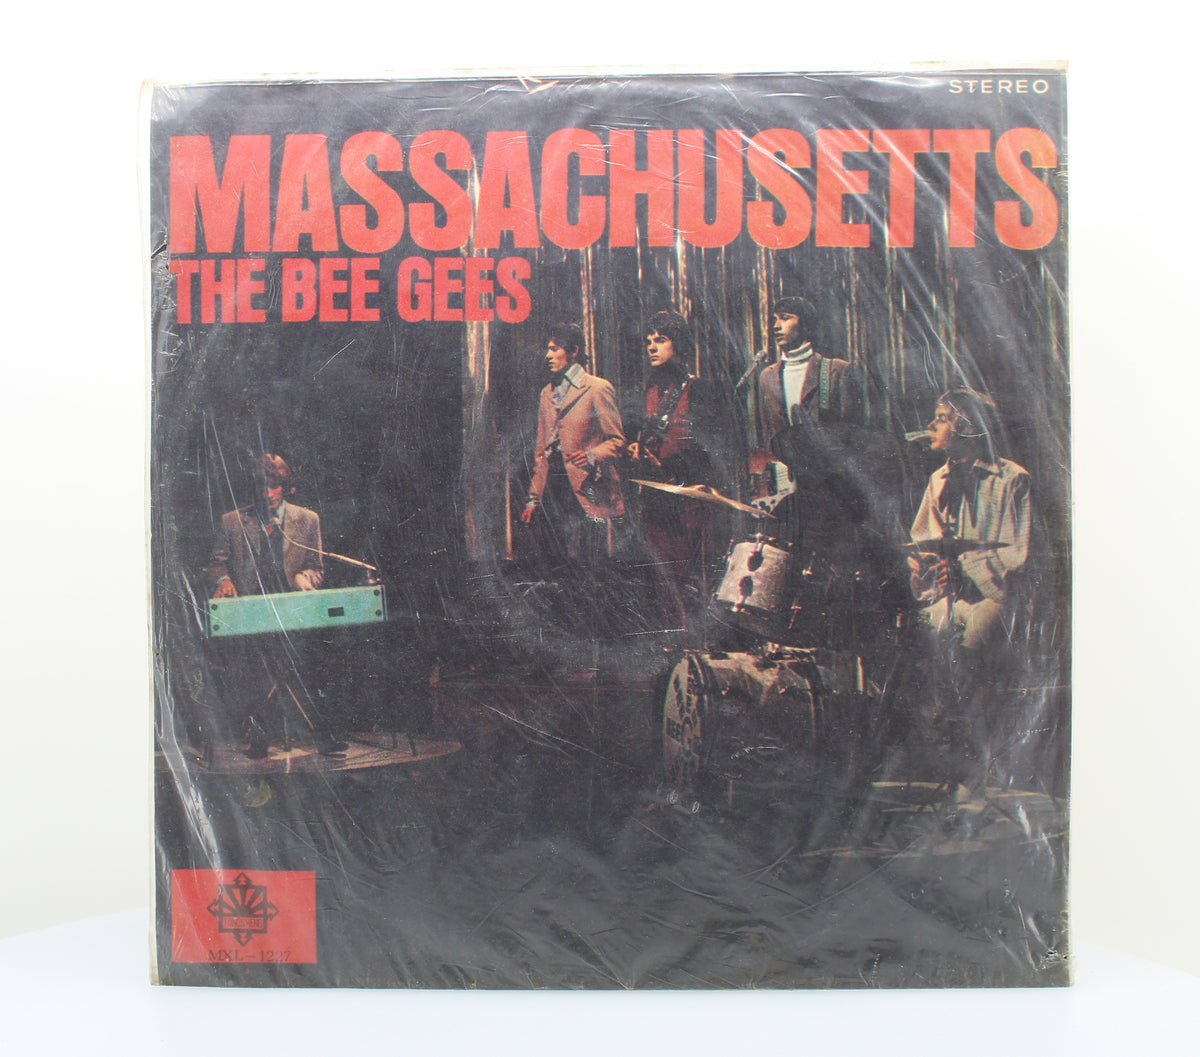 The Bee Gees – Massachusetts, Vinyl, LP, Album, Unofficial Release, Stereo, Taiwan 1969